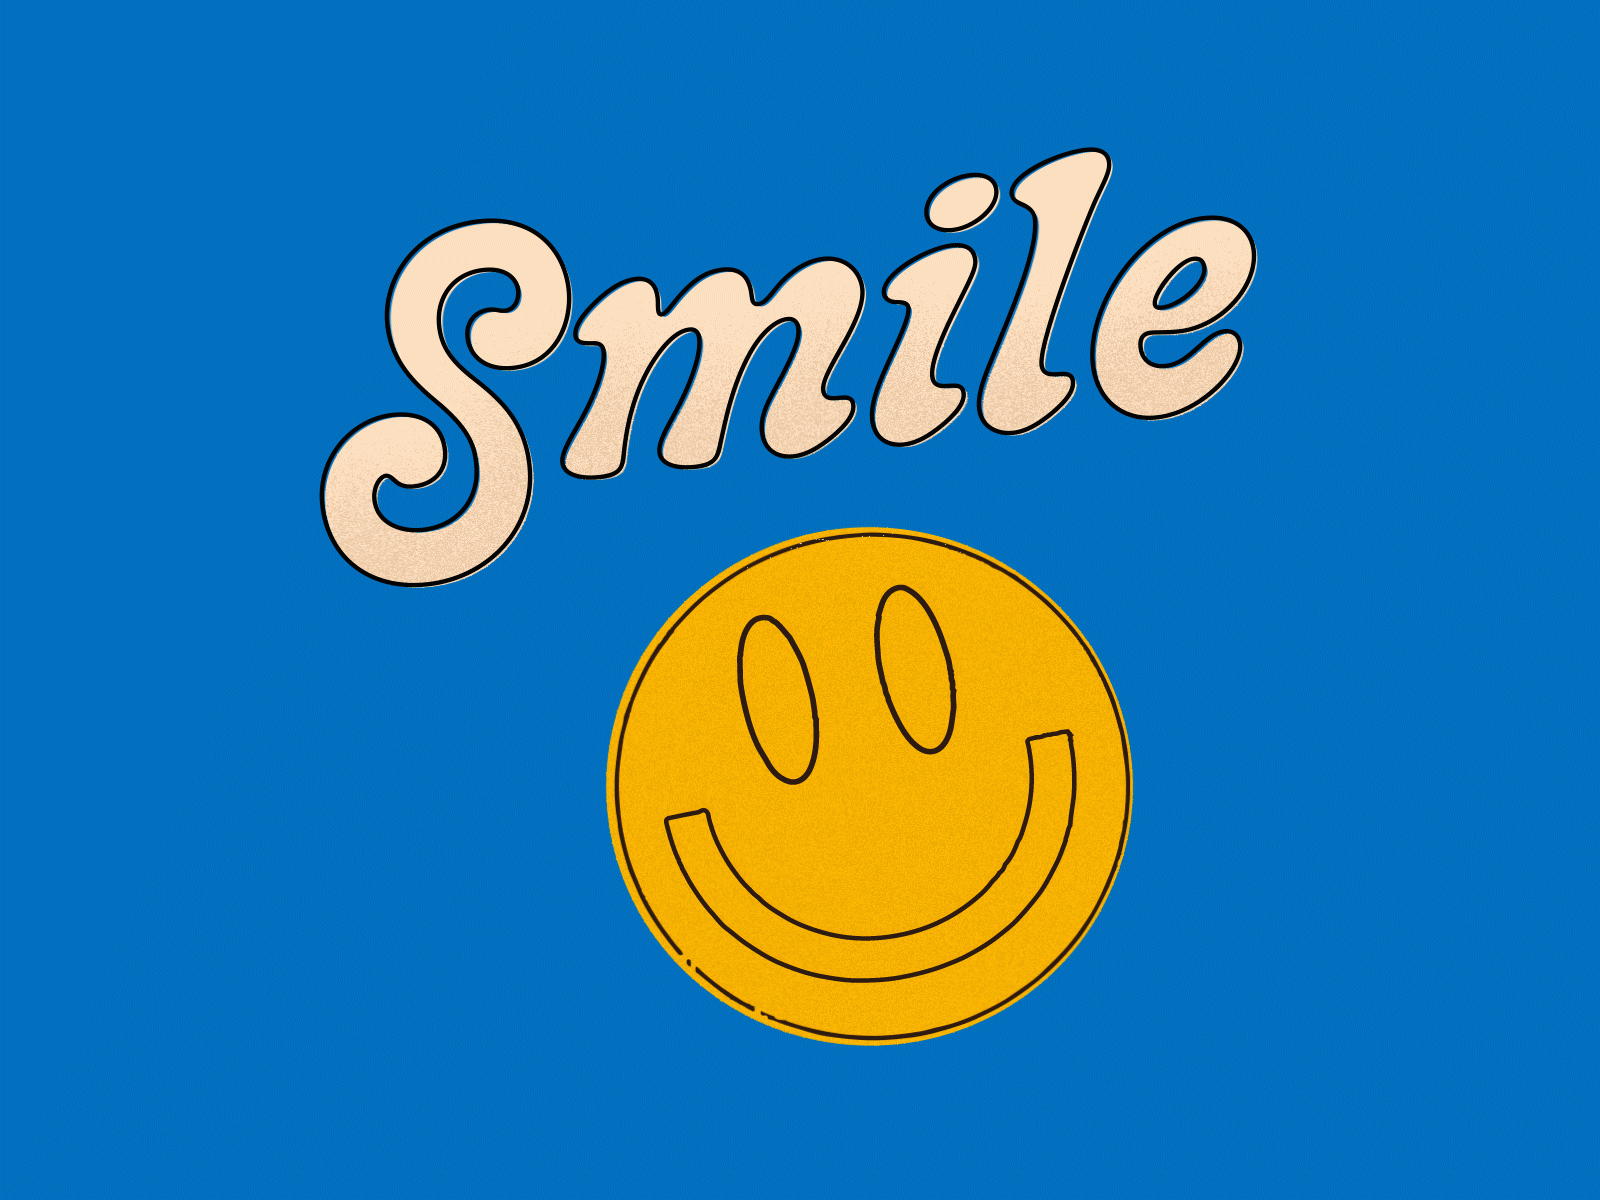 Keep Smilin' animation positivity smile smiley face texture typography